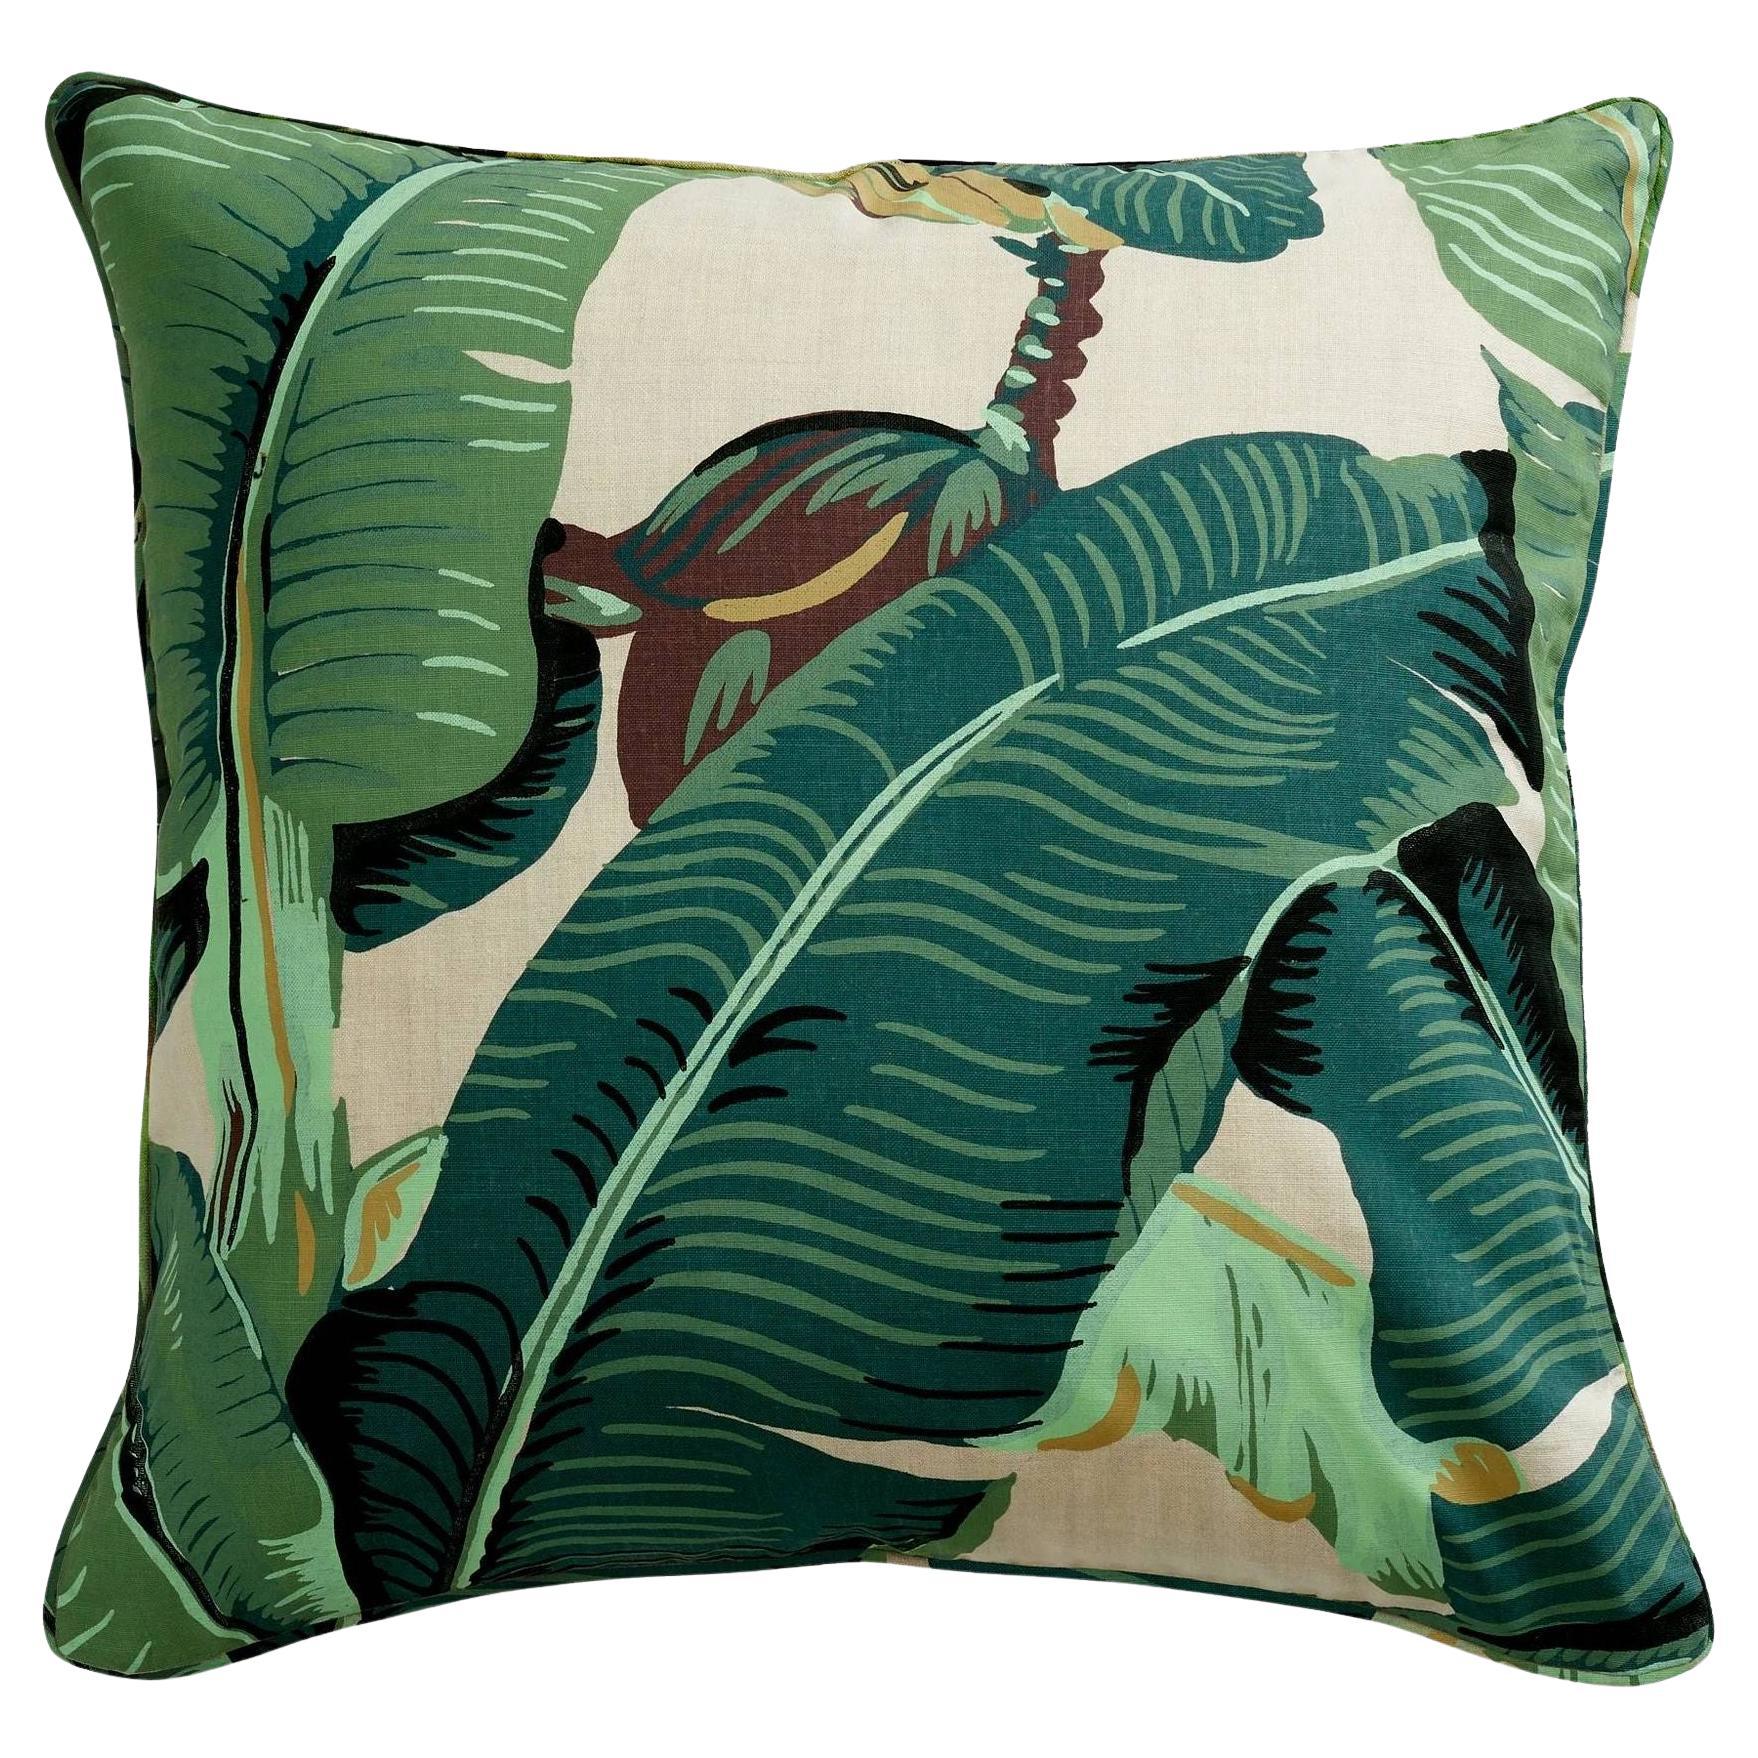 Martinique Banana Leaf Pillow from The Beverly Hills Hotel For Sale